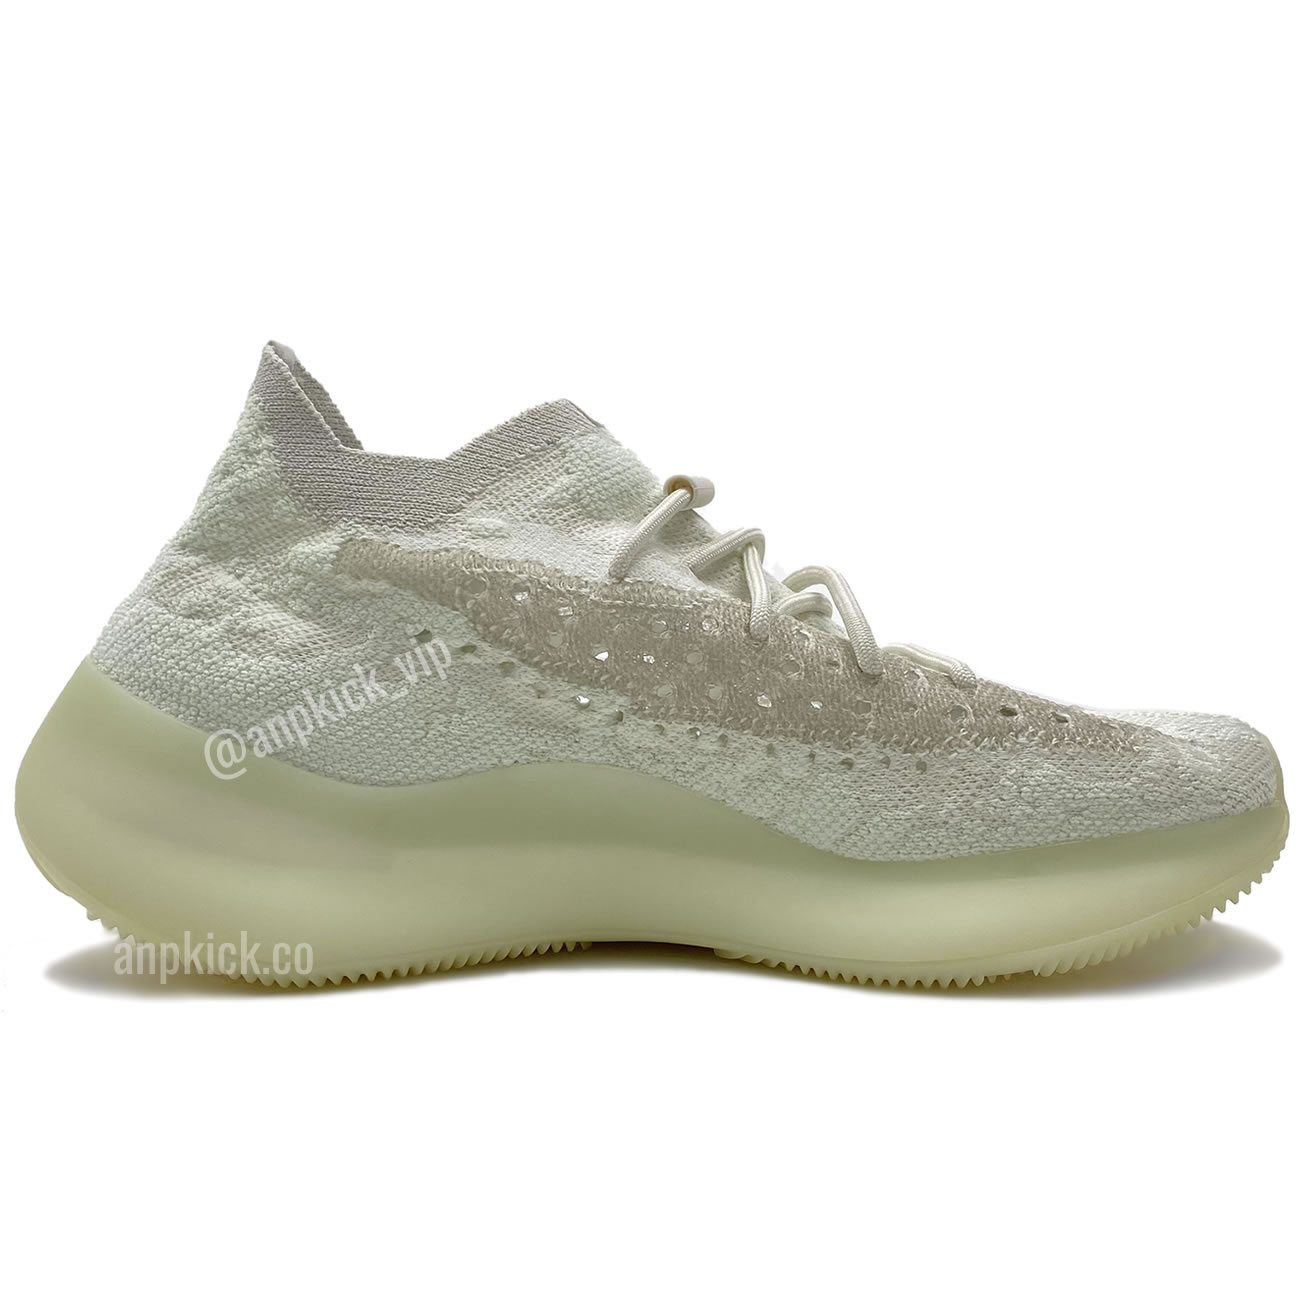 adidas Yeezy Boost 380 "Calcite Glow" Release Date GZ8668